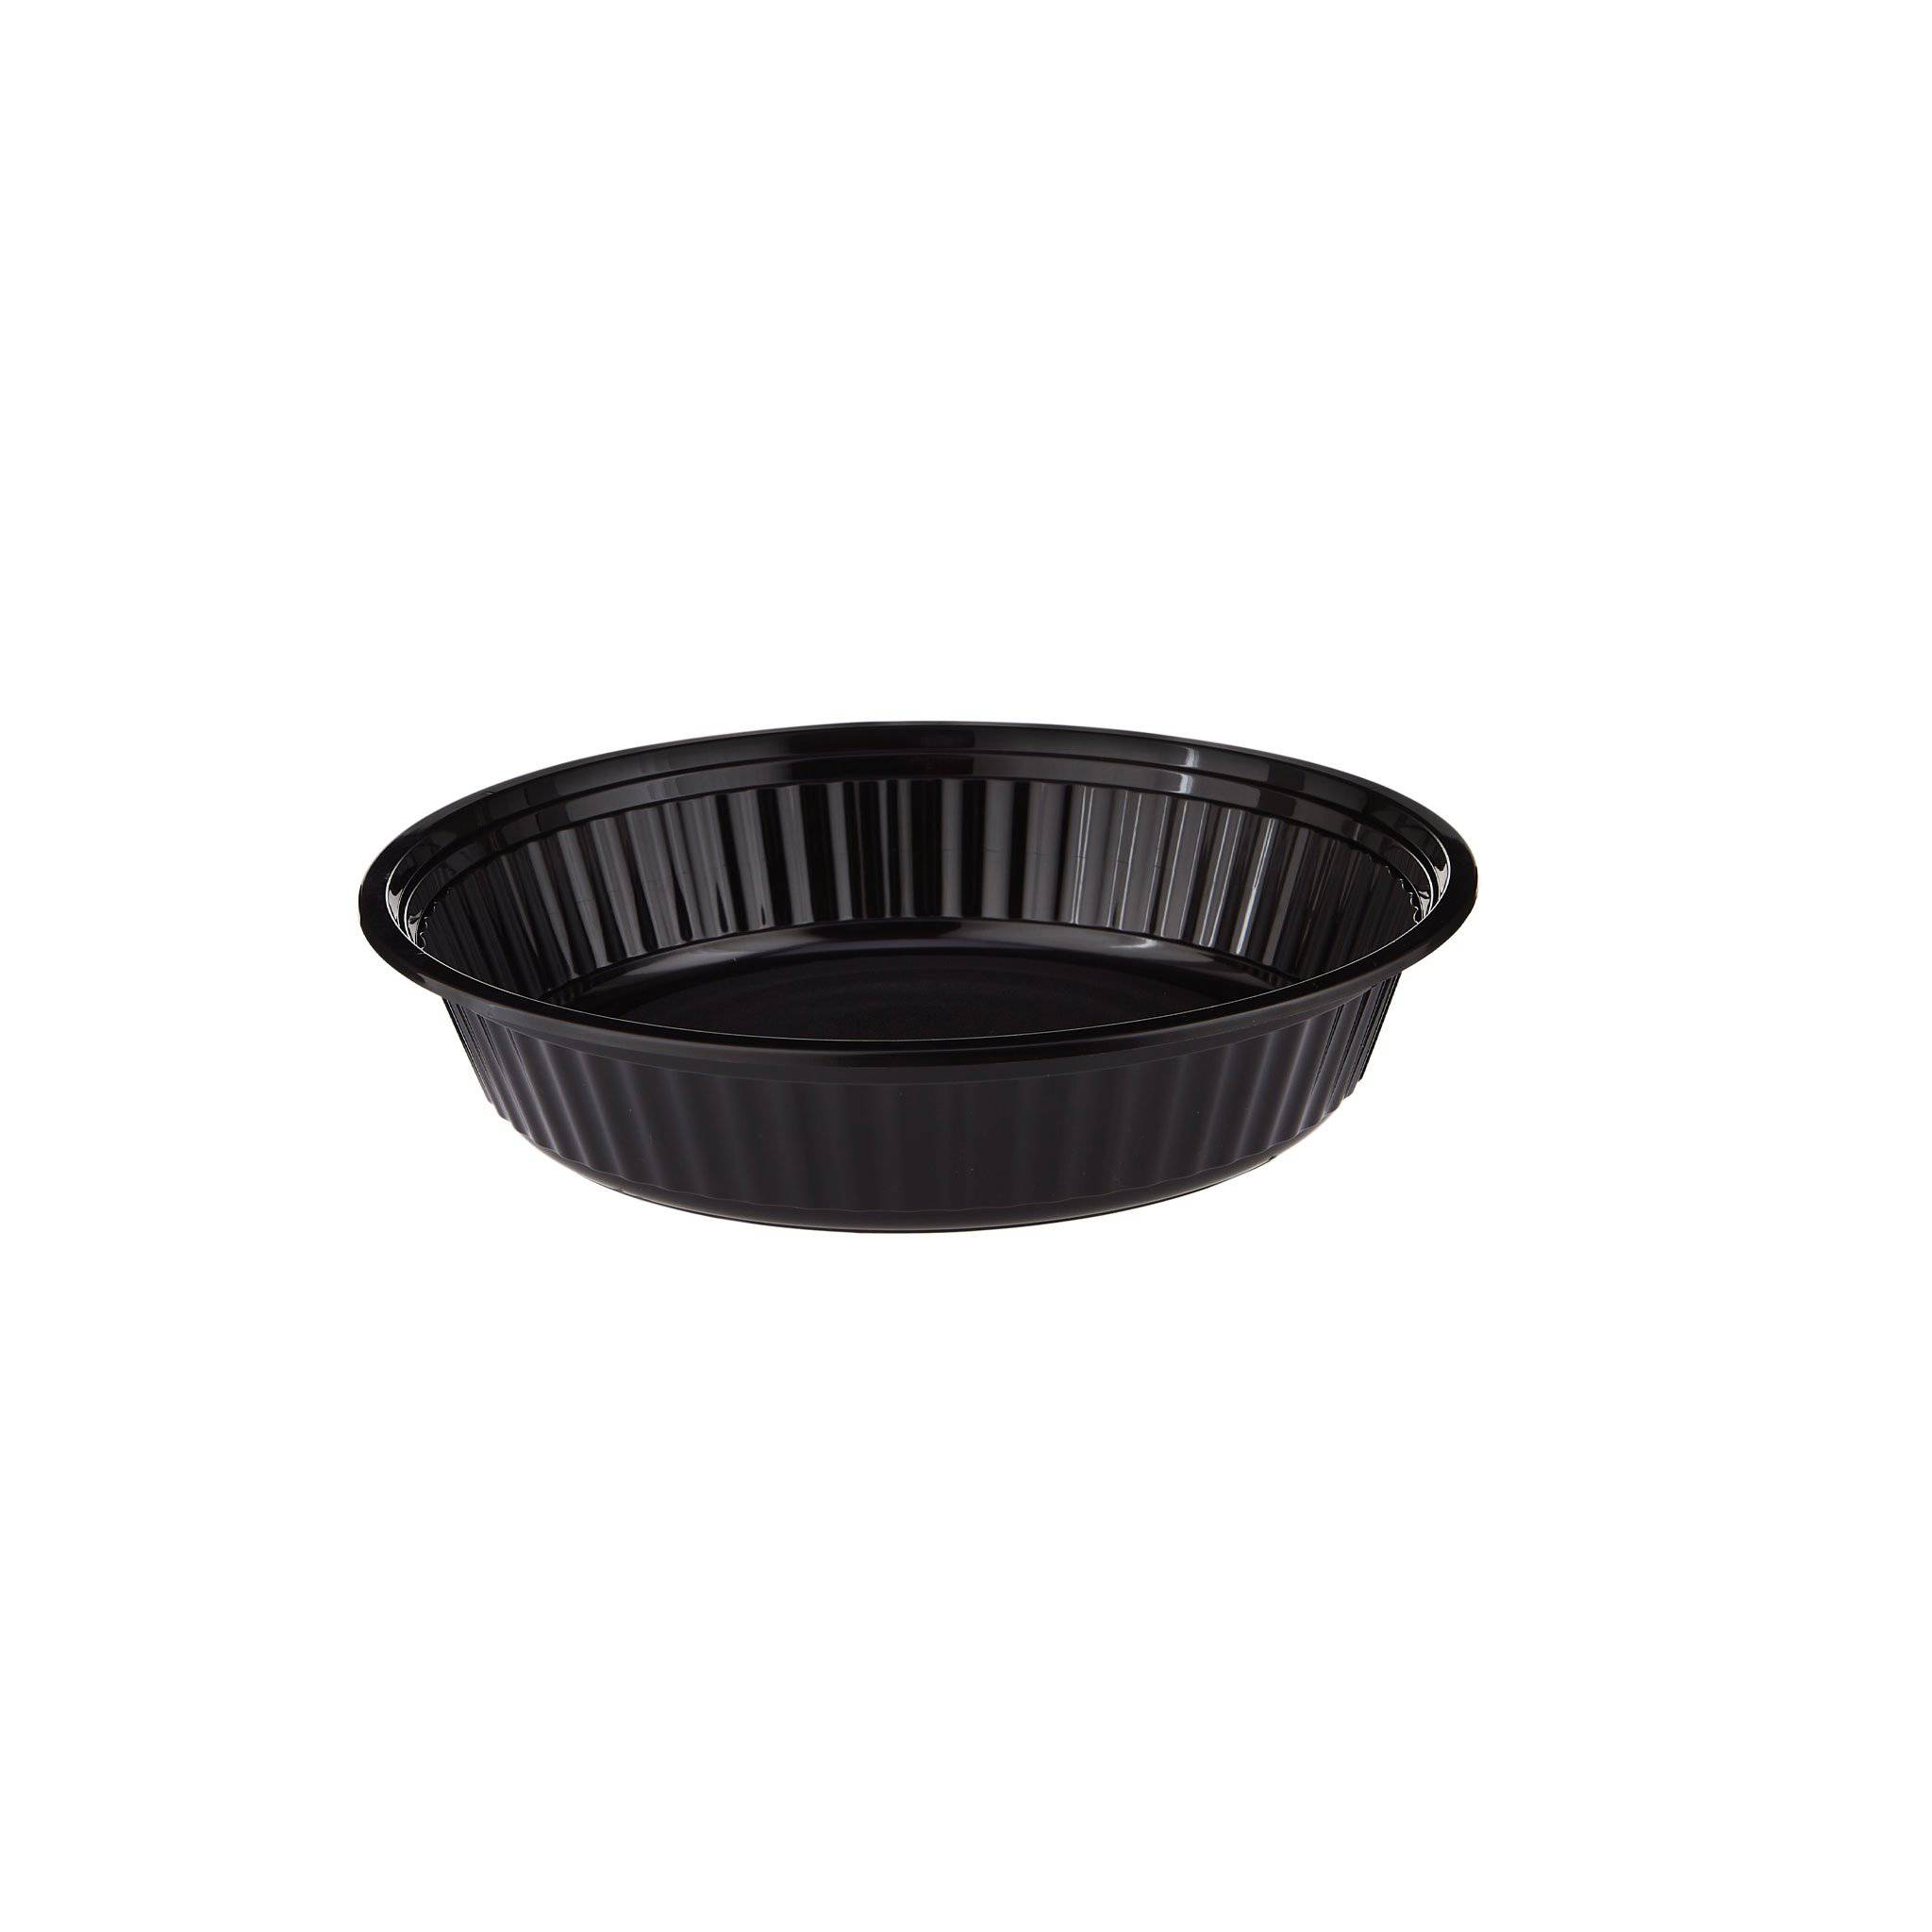 Black Base Heavy Duty Round Container 37 Oz 300 Pieces - Hotpack Global